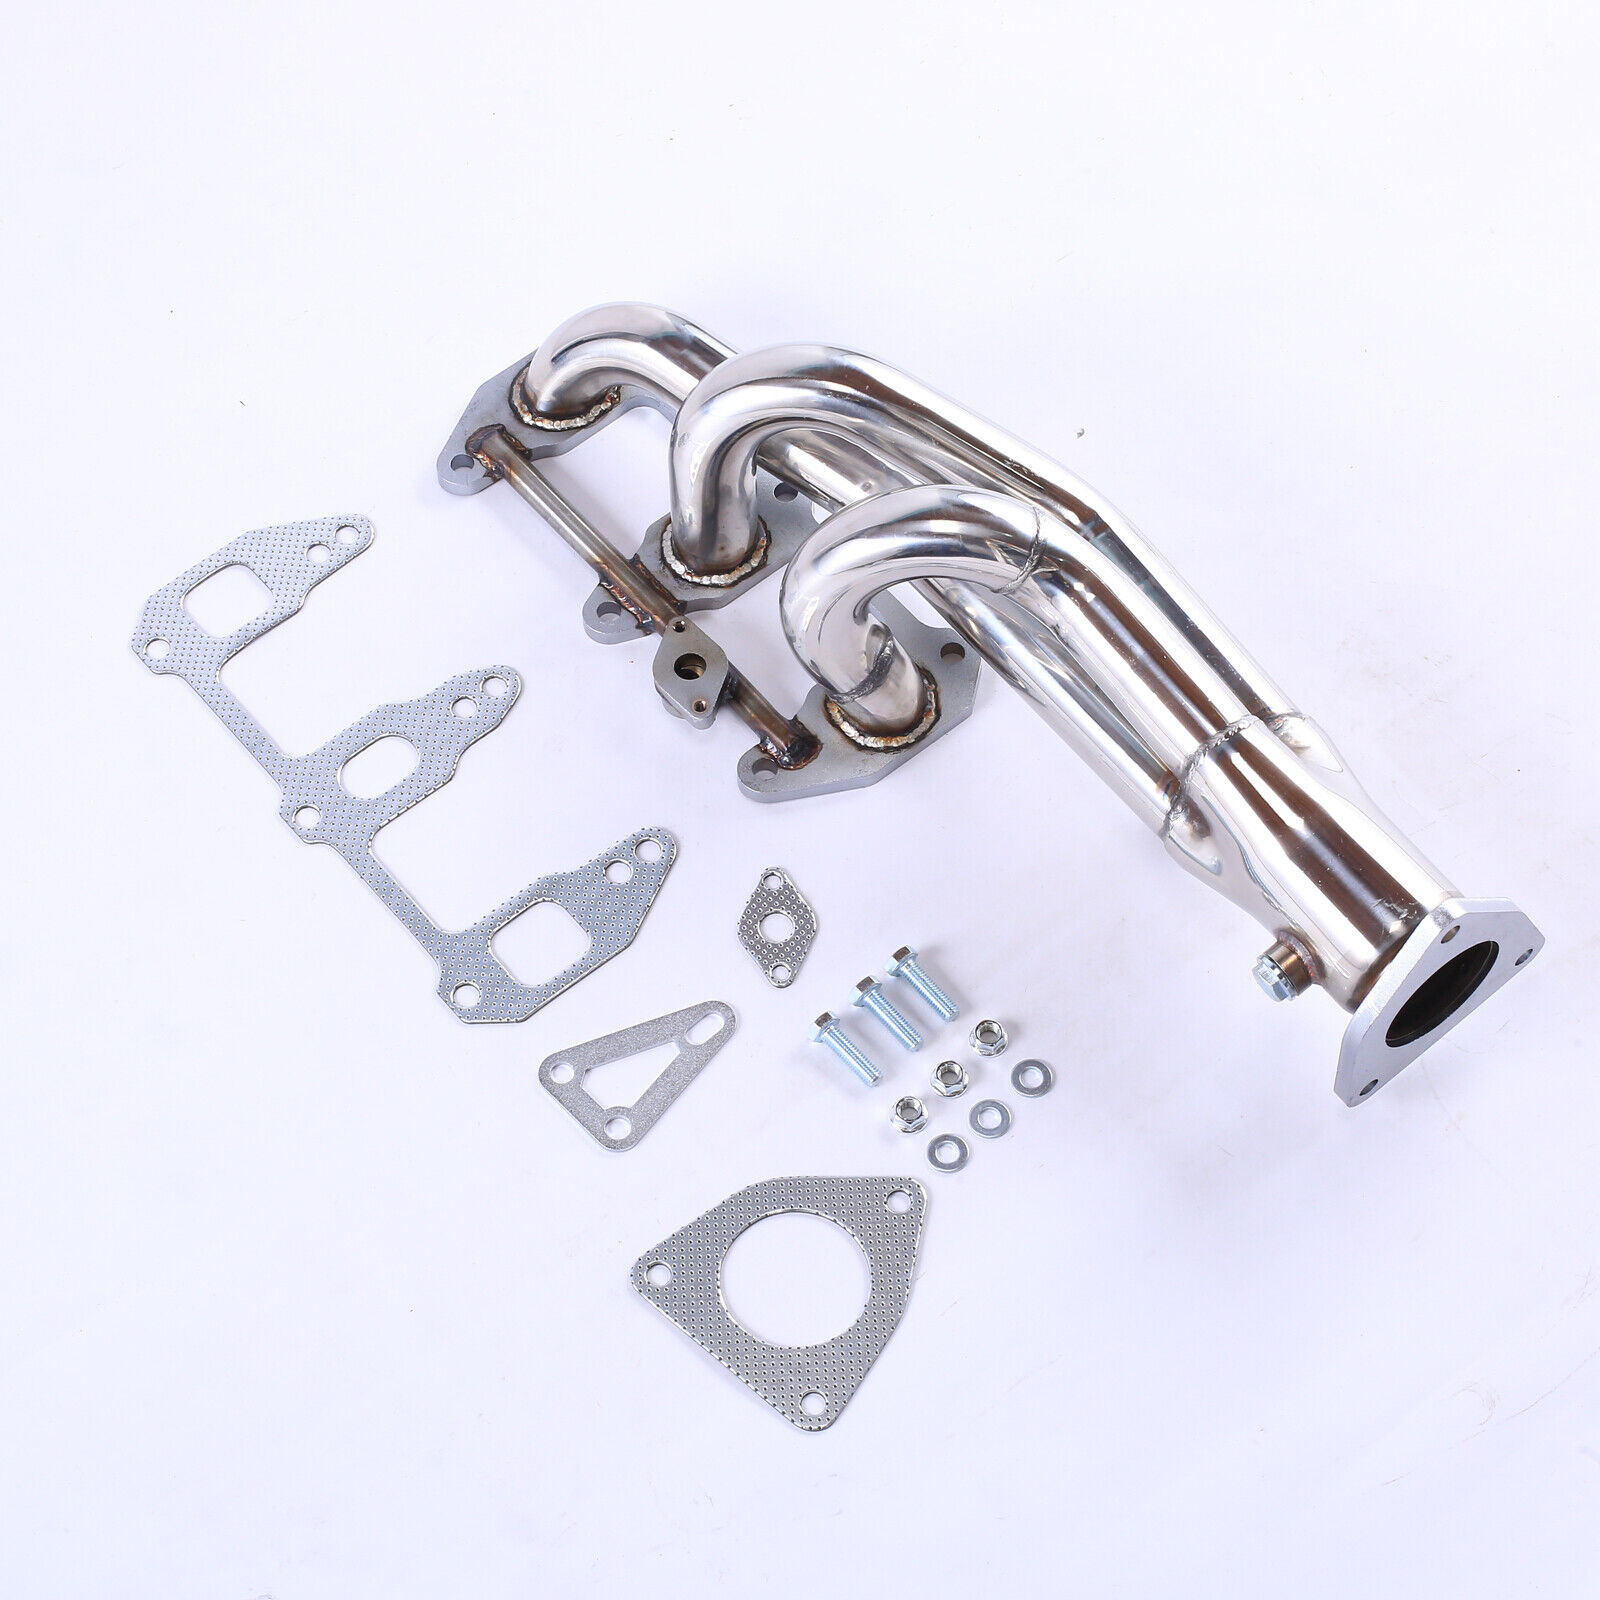 New Stainless Steel Polished Exhaust Header For MAZDA-RX8 SE3P 1.3L 03-10 